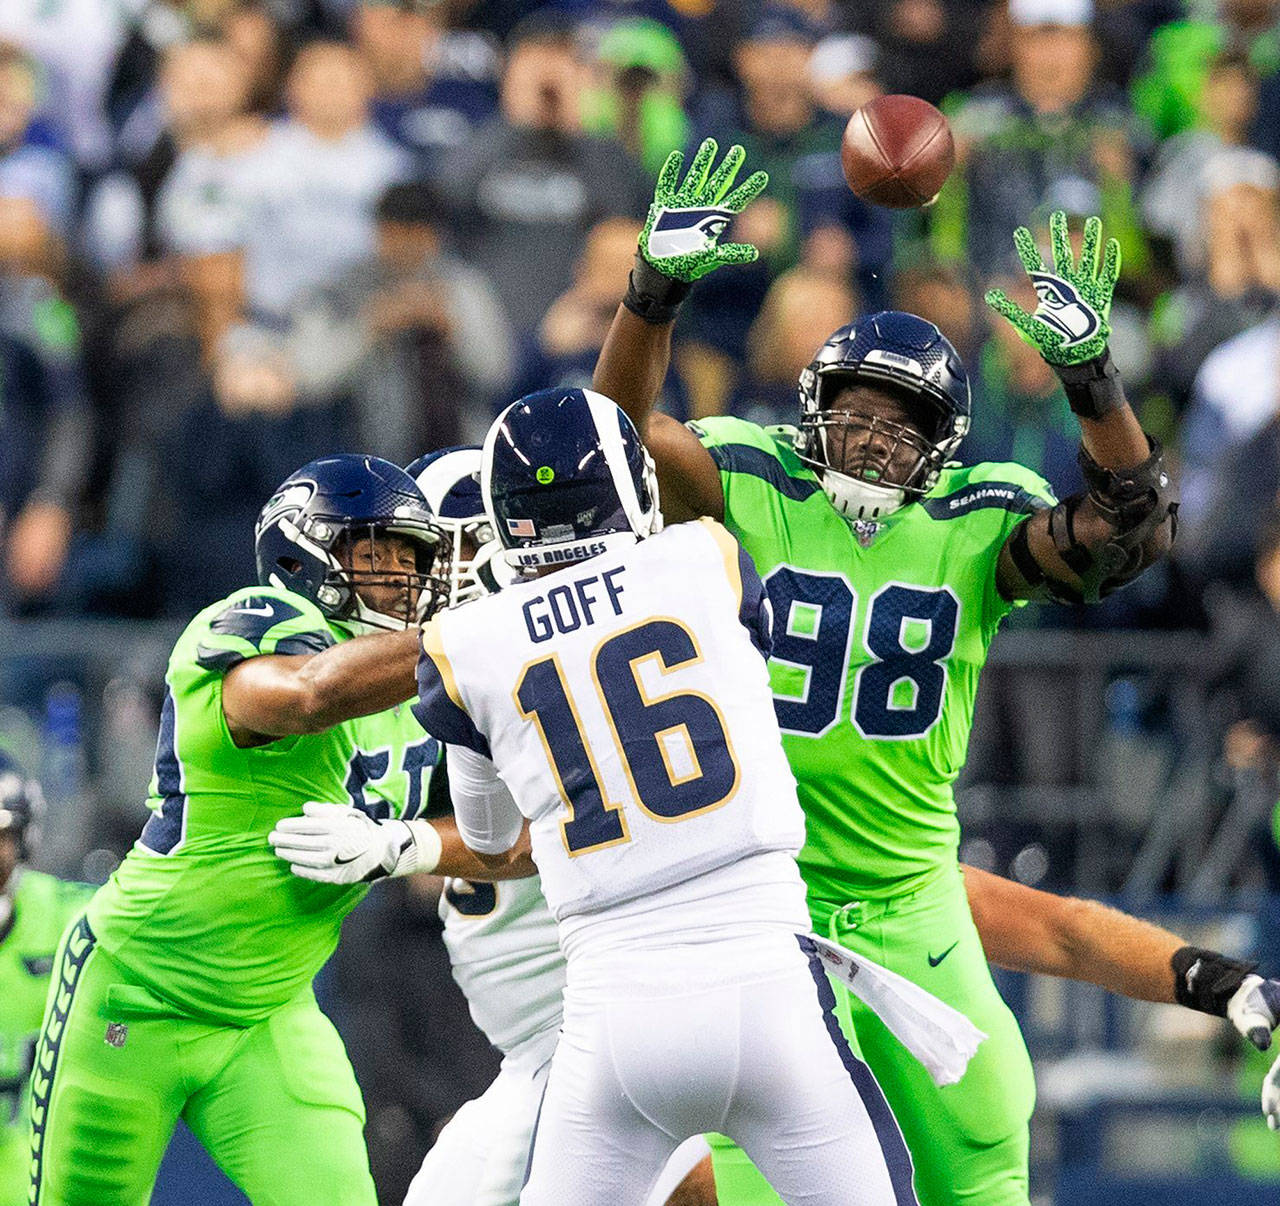 Seattle Seahawks linebacker K.J. Wright, left and defensive end Rasheem Green (98) pressure Los Angeles Rams quarterback Jared Goff (16) at CenturyLink Field in Seattle on Thursday, Oct. 3, 2019. (Mike Siegel/Seattle Times/TNS)